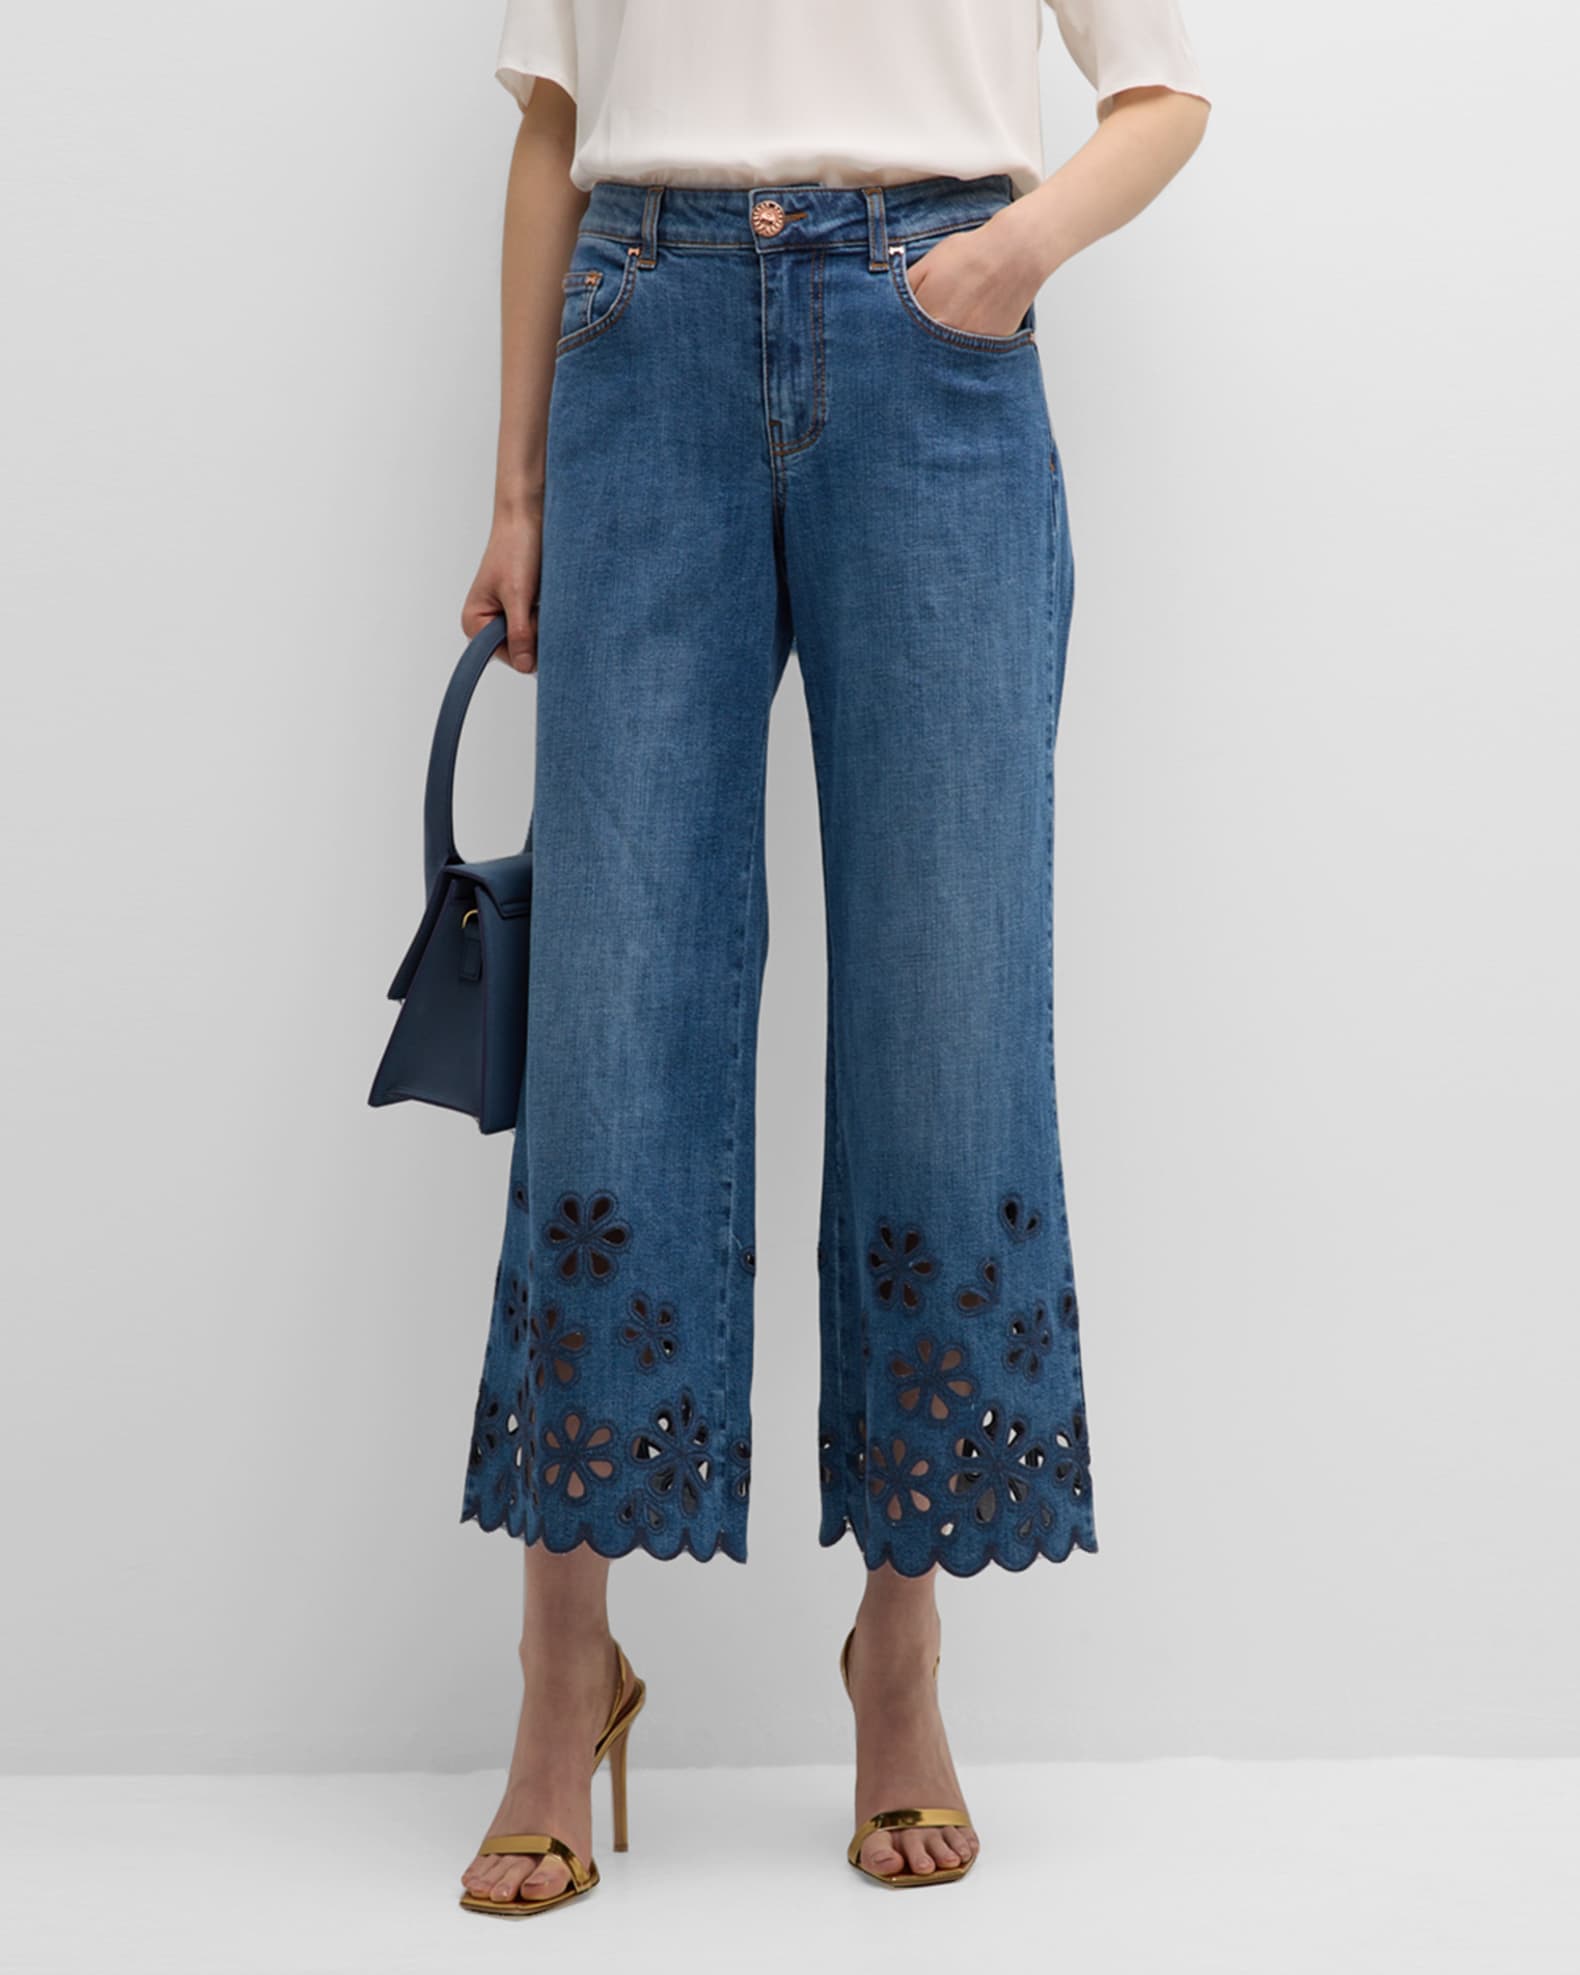 Capri Jeans with Embroidered Rose Accent  Embroidery jeans, Capri jeans,  Floral denim pants